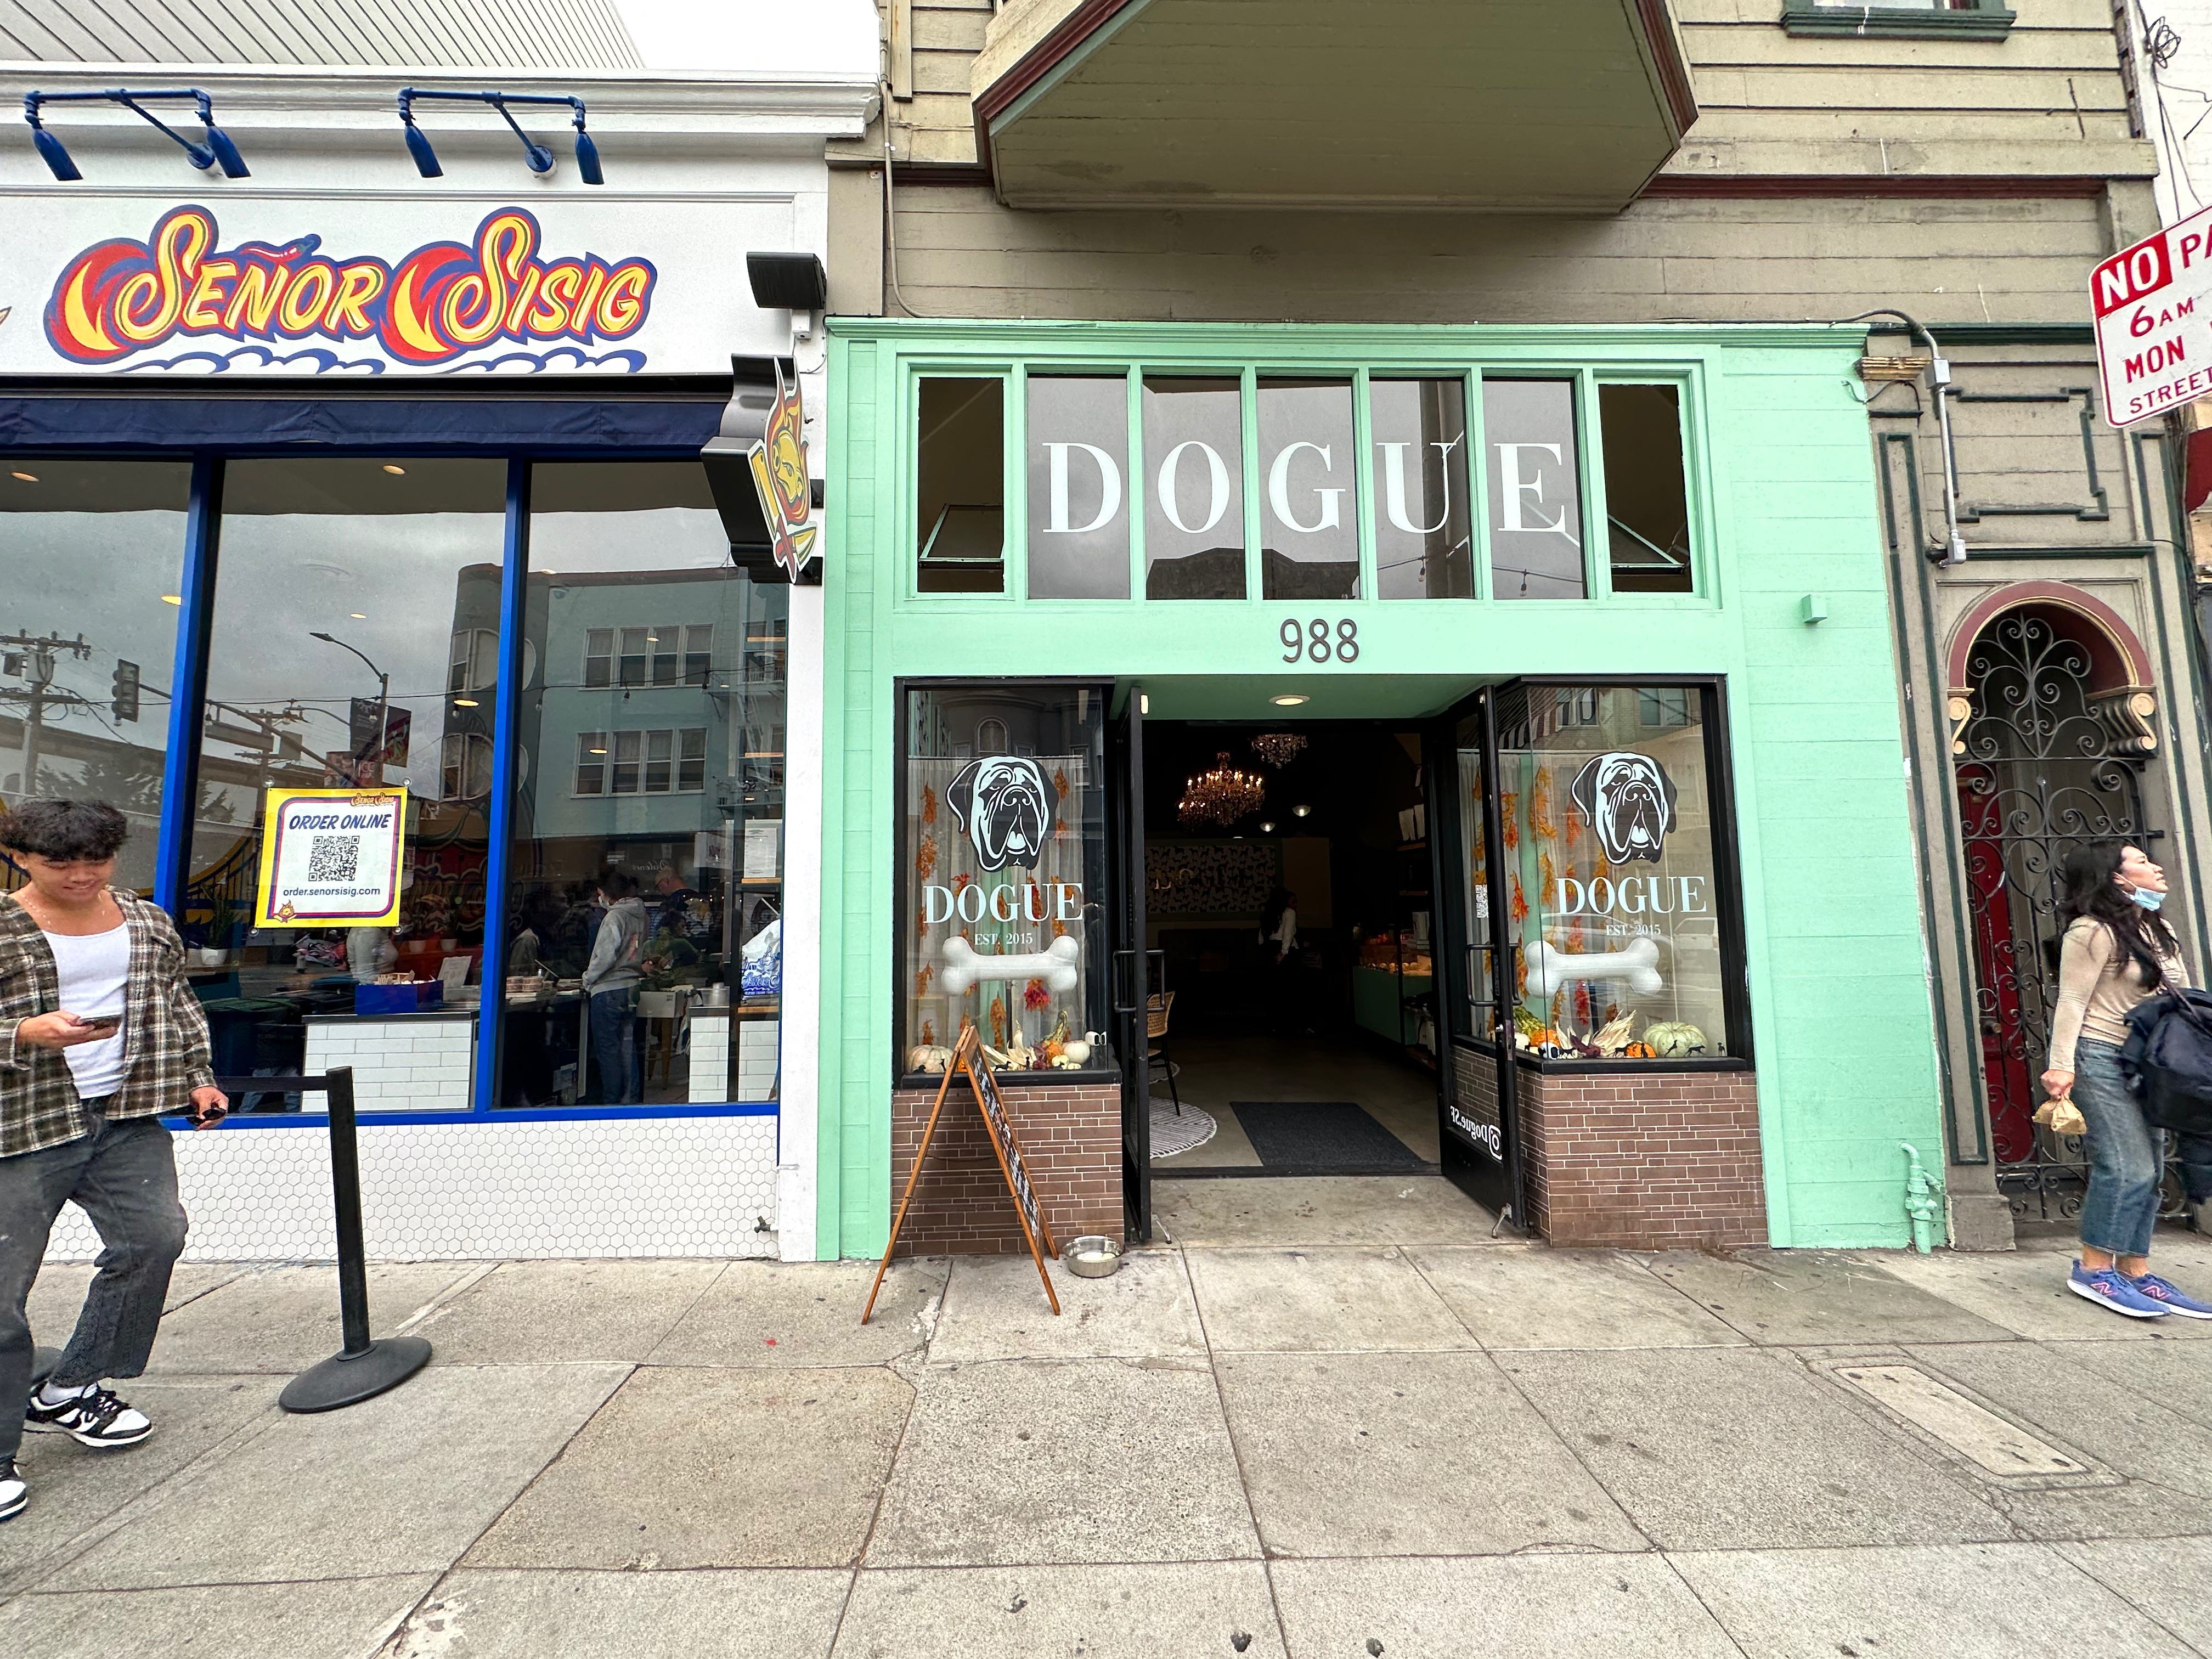 Dogue’s Valencia Street storefront on a foggy San Francisco Sunday afternoon.